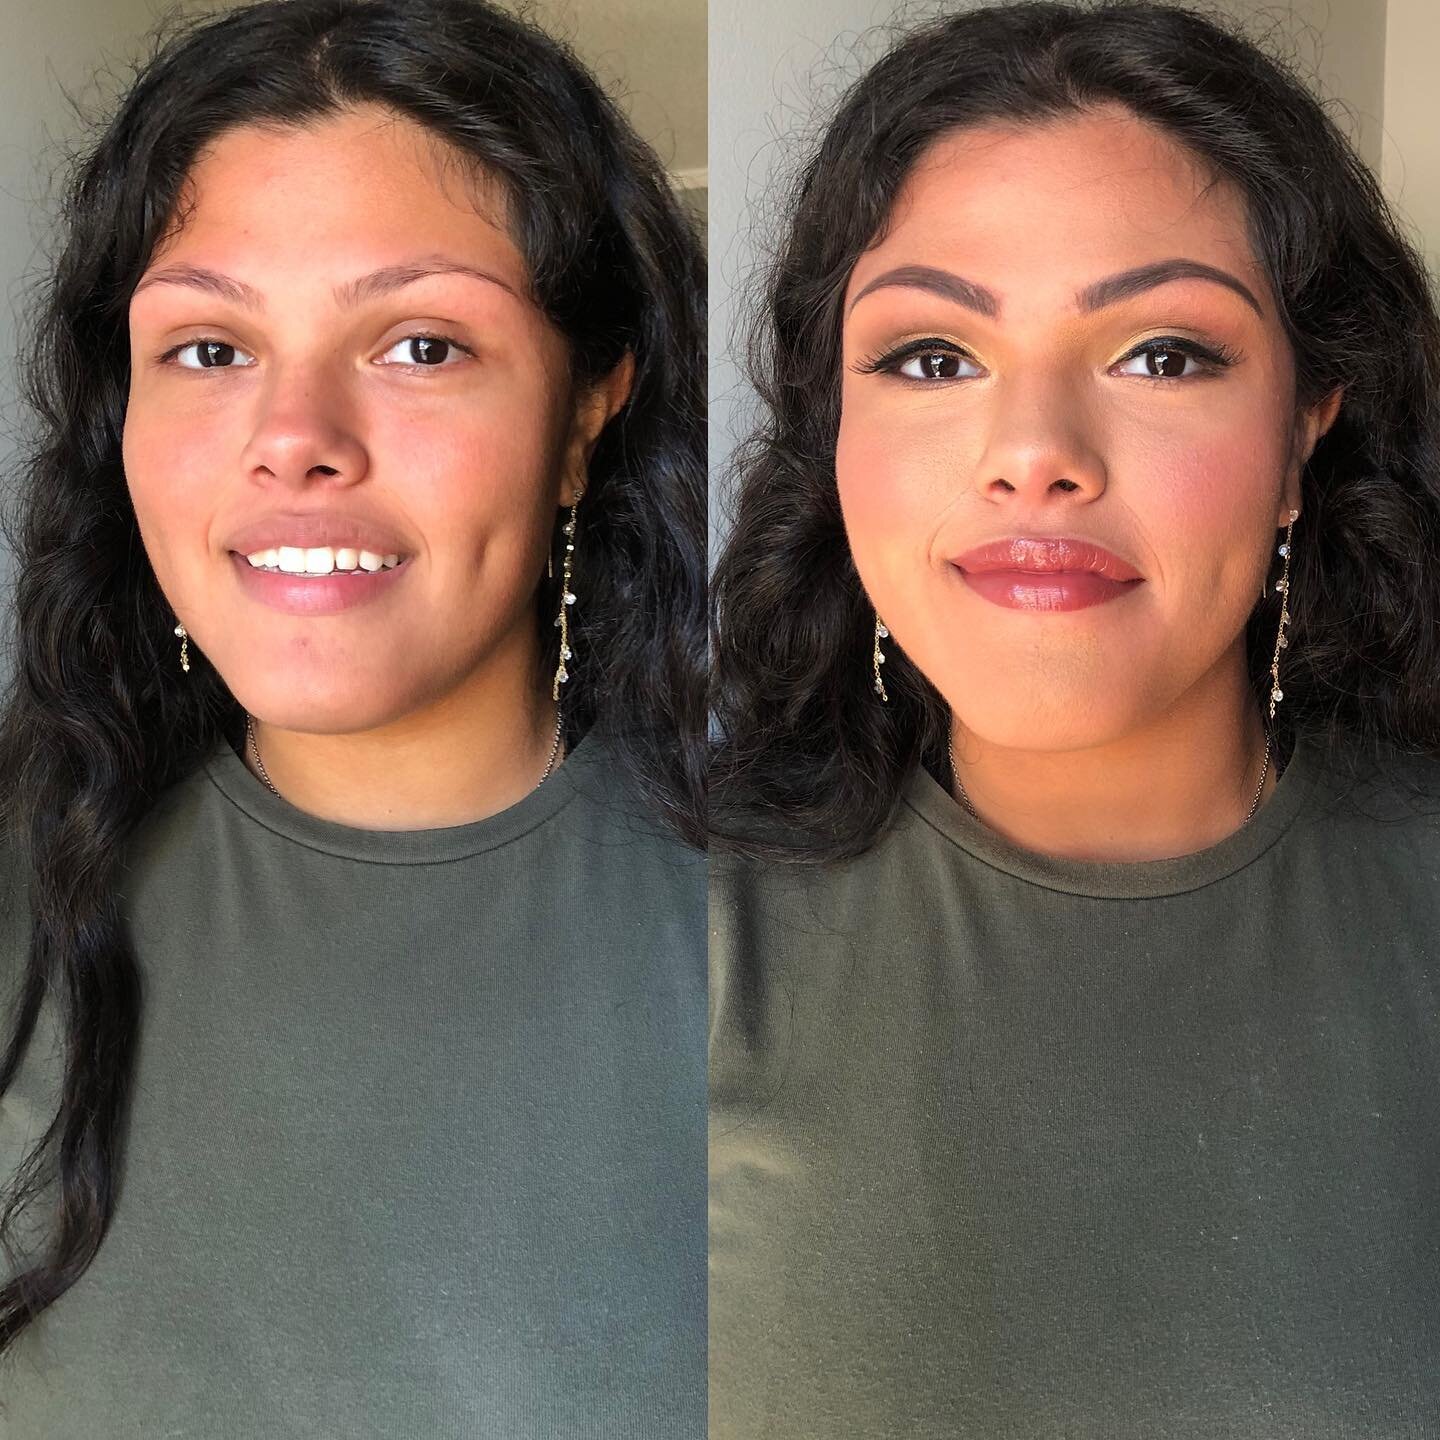 She is STUNNING 🤩 

For Inquiries-
HTTPS://www.makeupbycaitlin.com

https://www.facebook.com/makeupbycaitlinspah/

Instagram : @caitlinguillien_mua 

PRODUCTS USED
PUR 4 in 1 concealer, powder, visionary palette, and fully charged mascara
GRAFTOBIAN